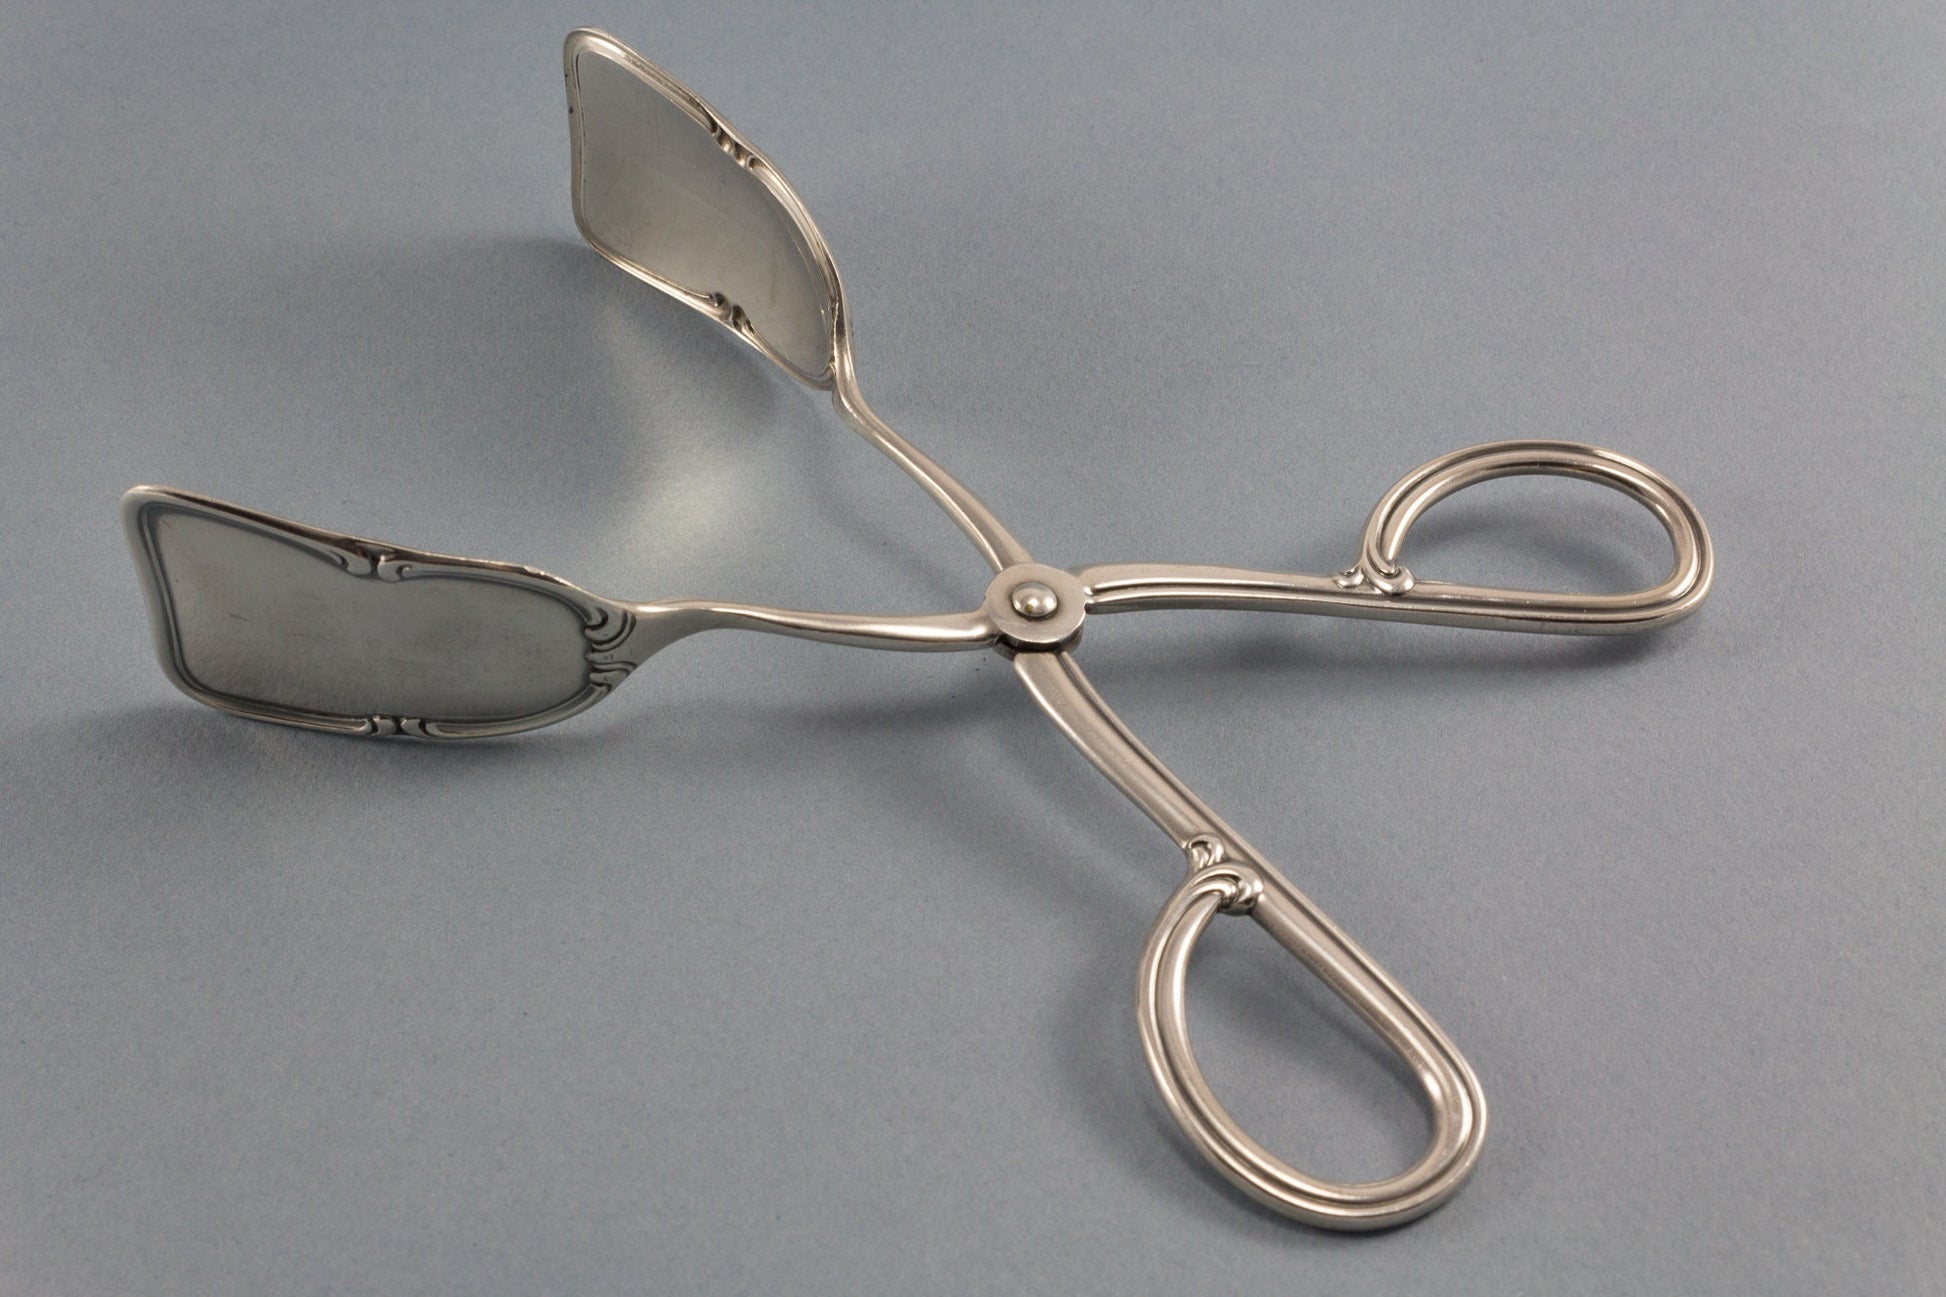 Silver-plated pastry pliers by WMF, vintage